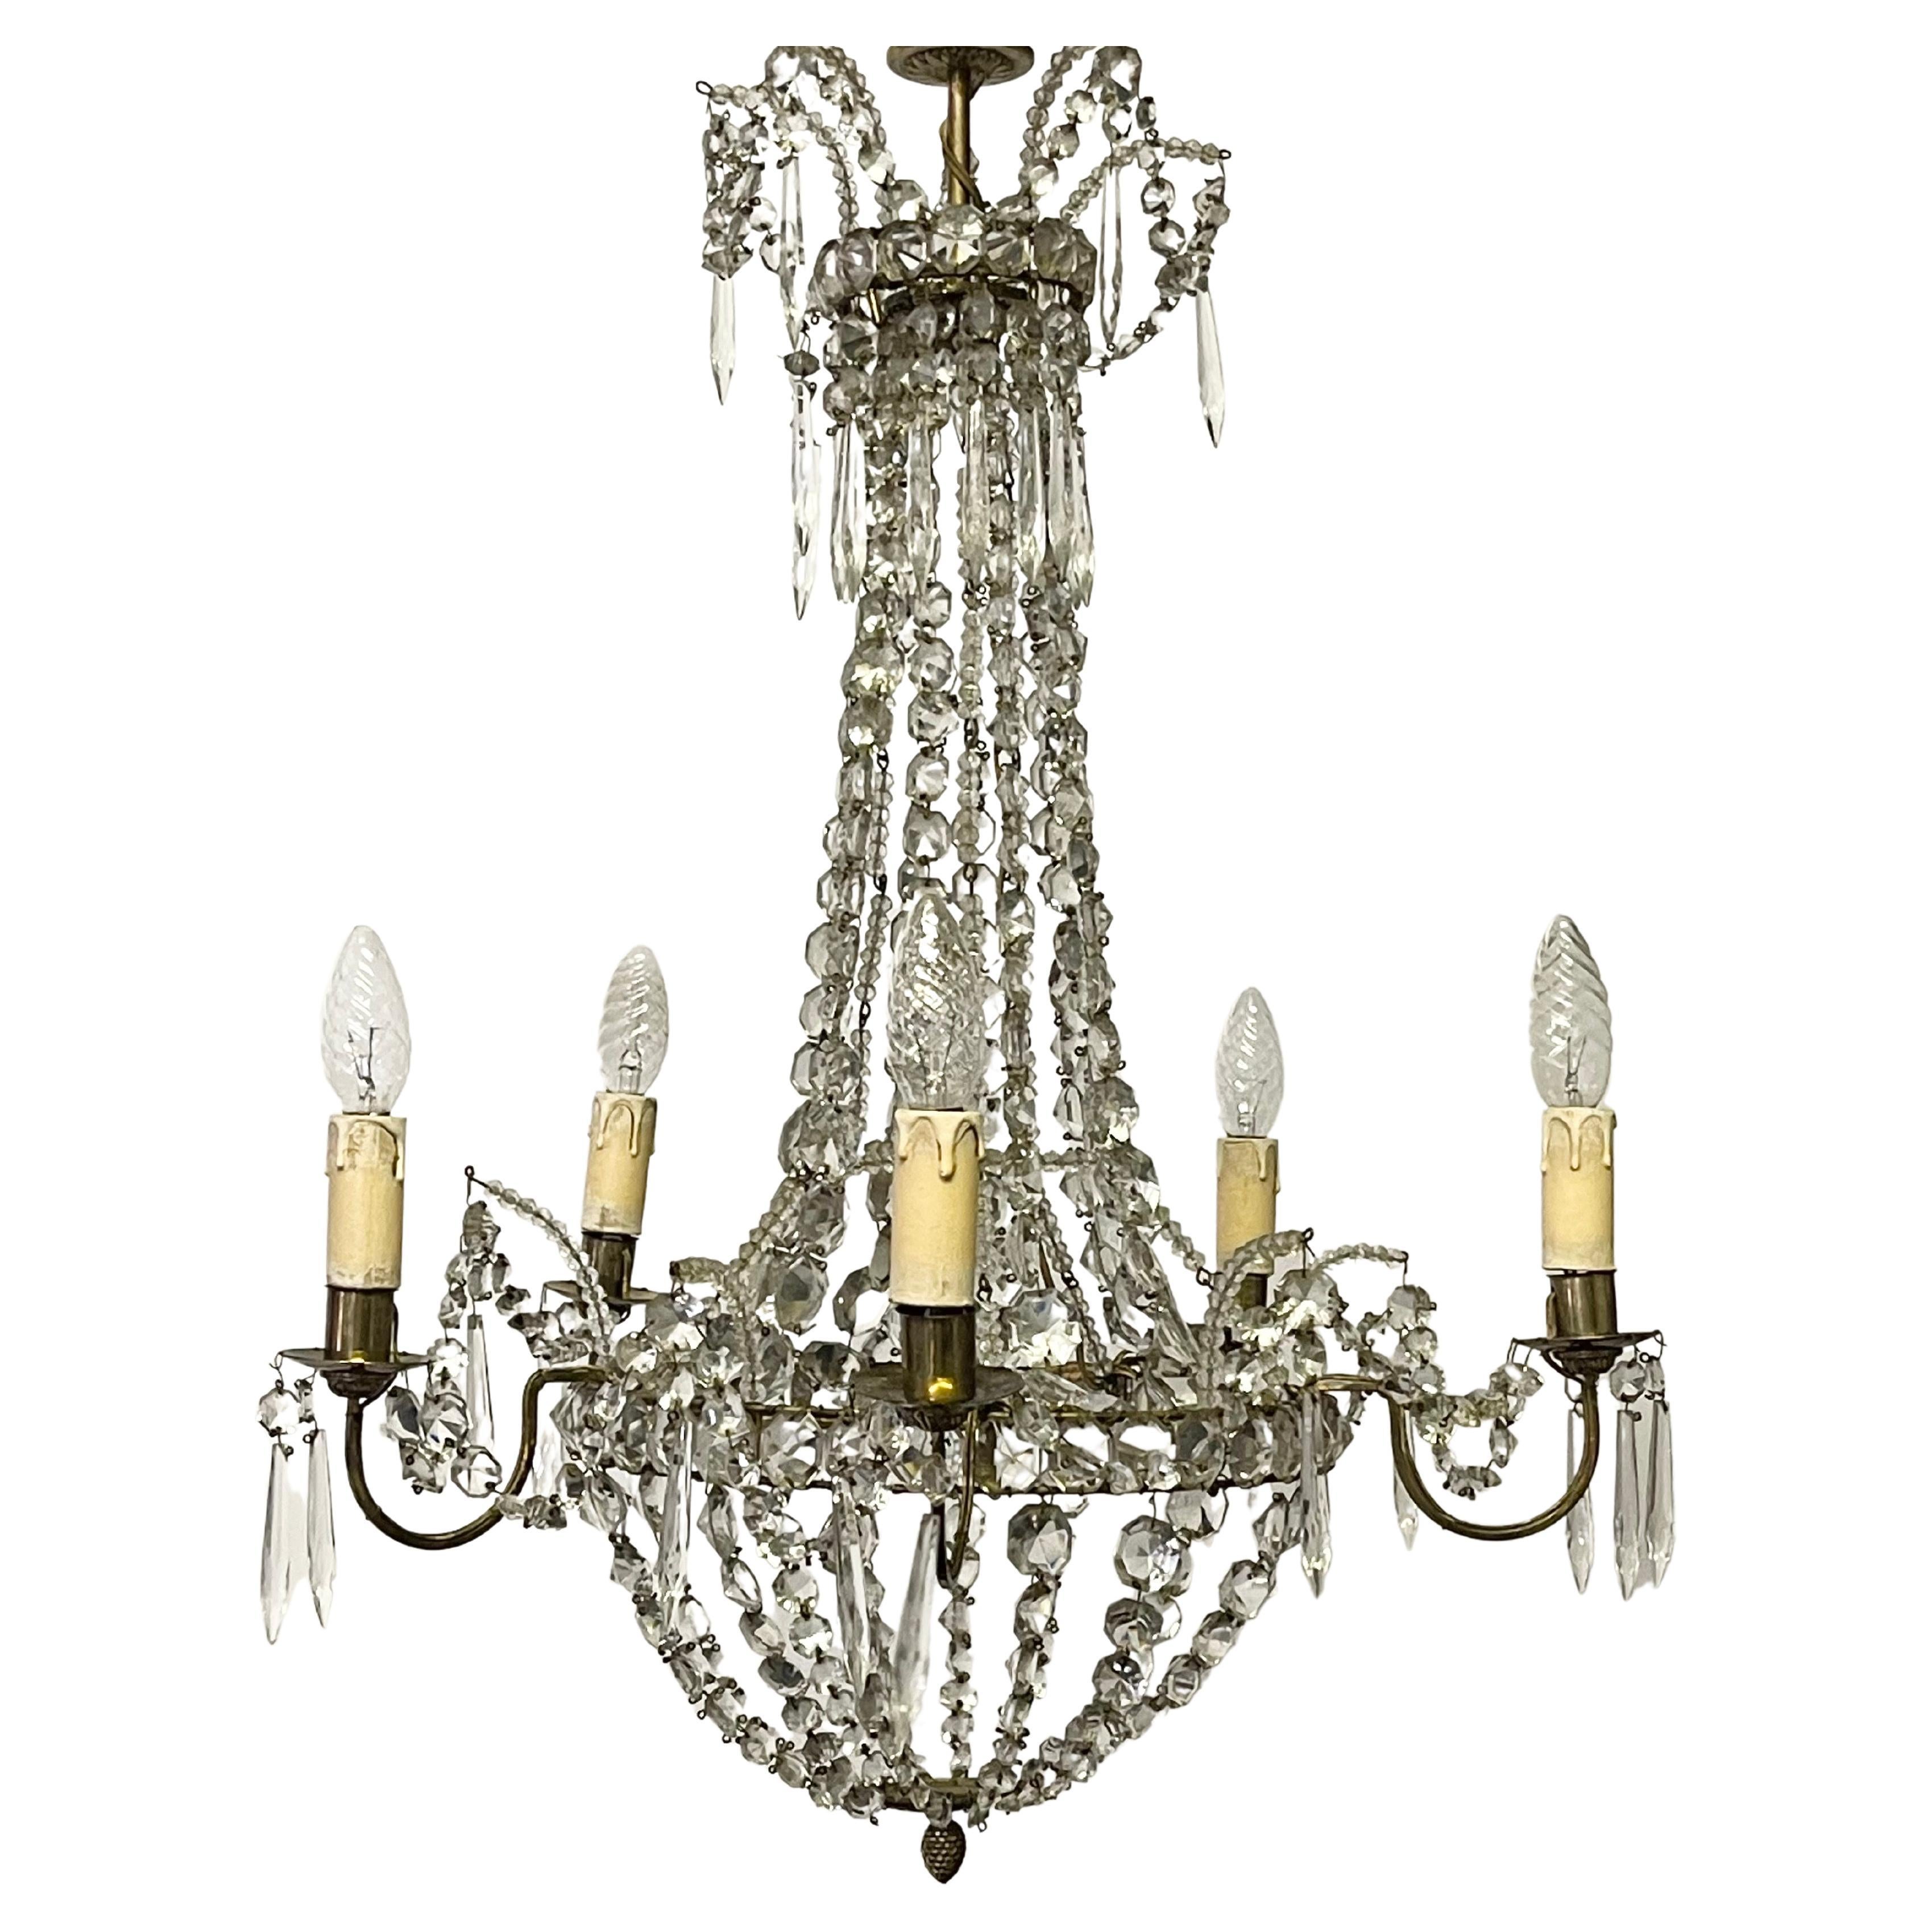 A lovely brass and beaded crystal chandelier, France, circa 1920s.
Socket: 5 x E14 for standard screw bulbs.
New wiring for US standards on request.





